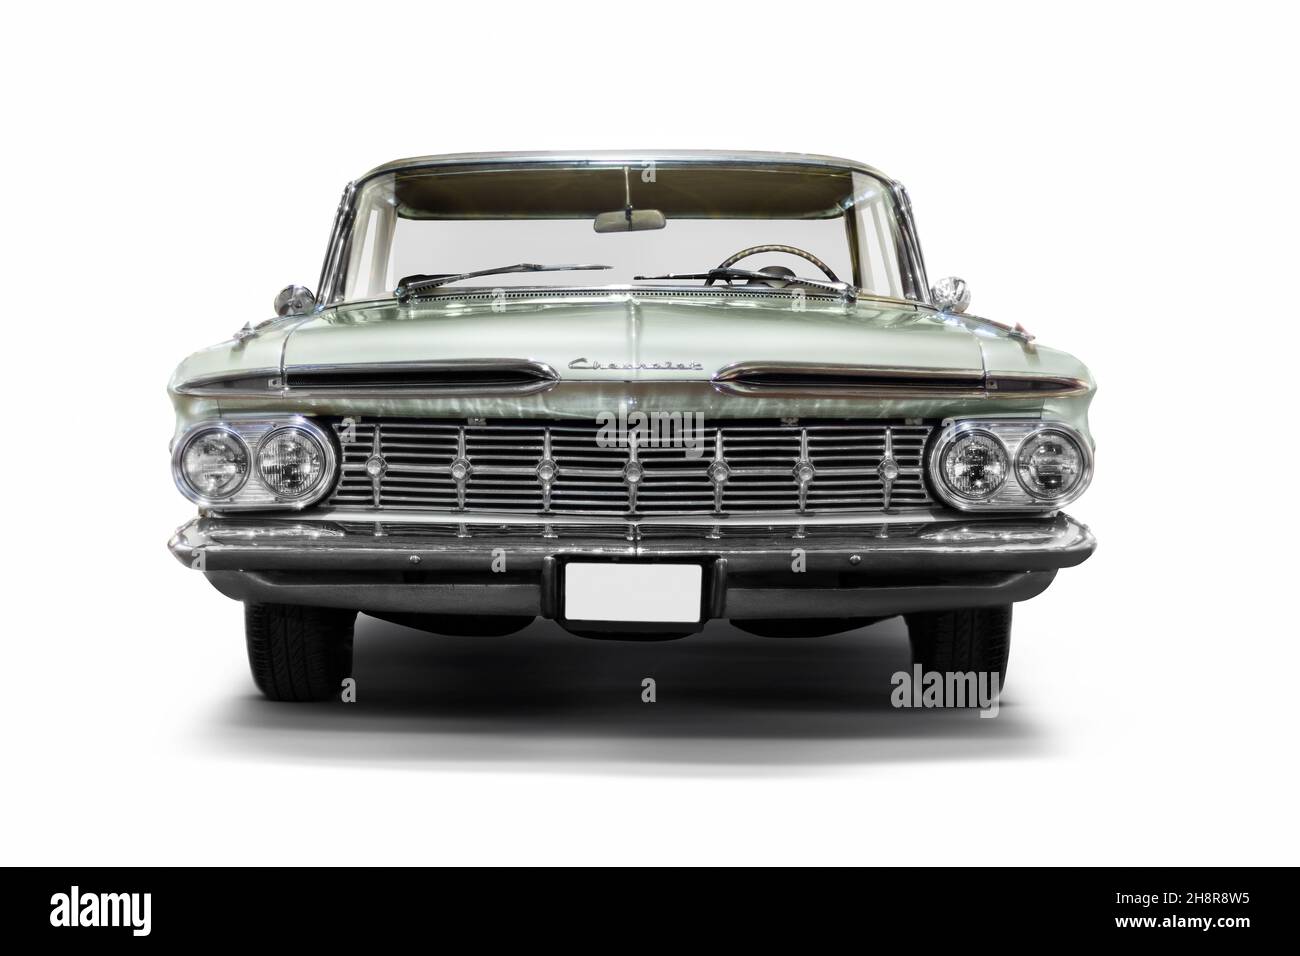 Izmir, Turkey - June 21, 2021: Front view of a Chevrolet Impala green car which produced in 1959 Editorial Shot in Izmir Turkey. Stock Photo